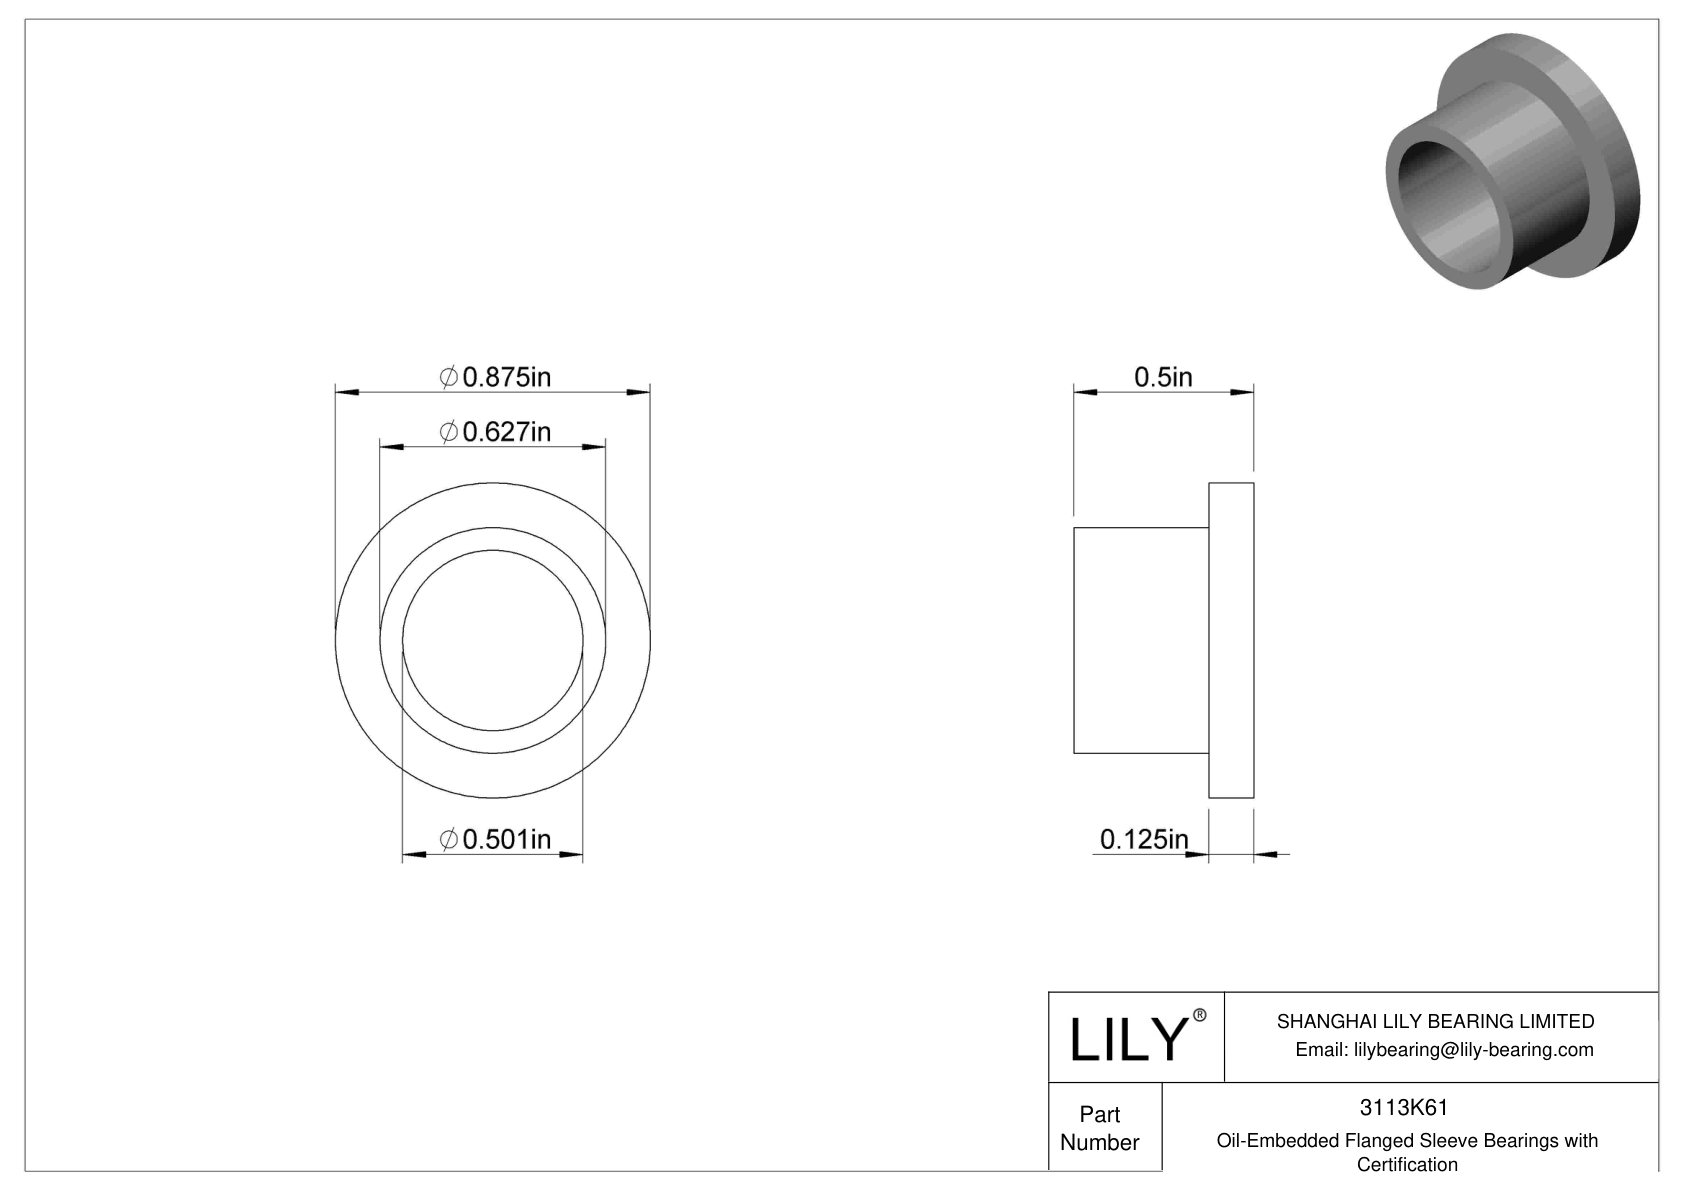 DBBDKGB Oil-Embedded Flanged Sleeve Bearings with Certification cad drawing